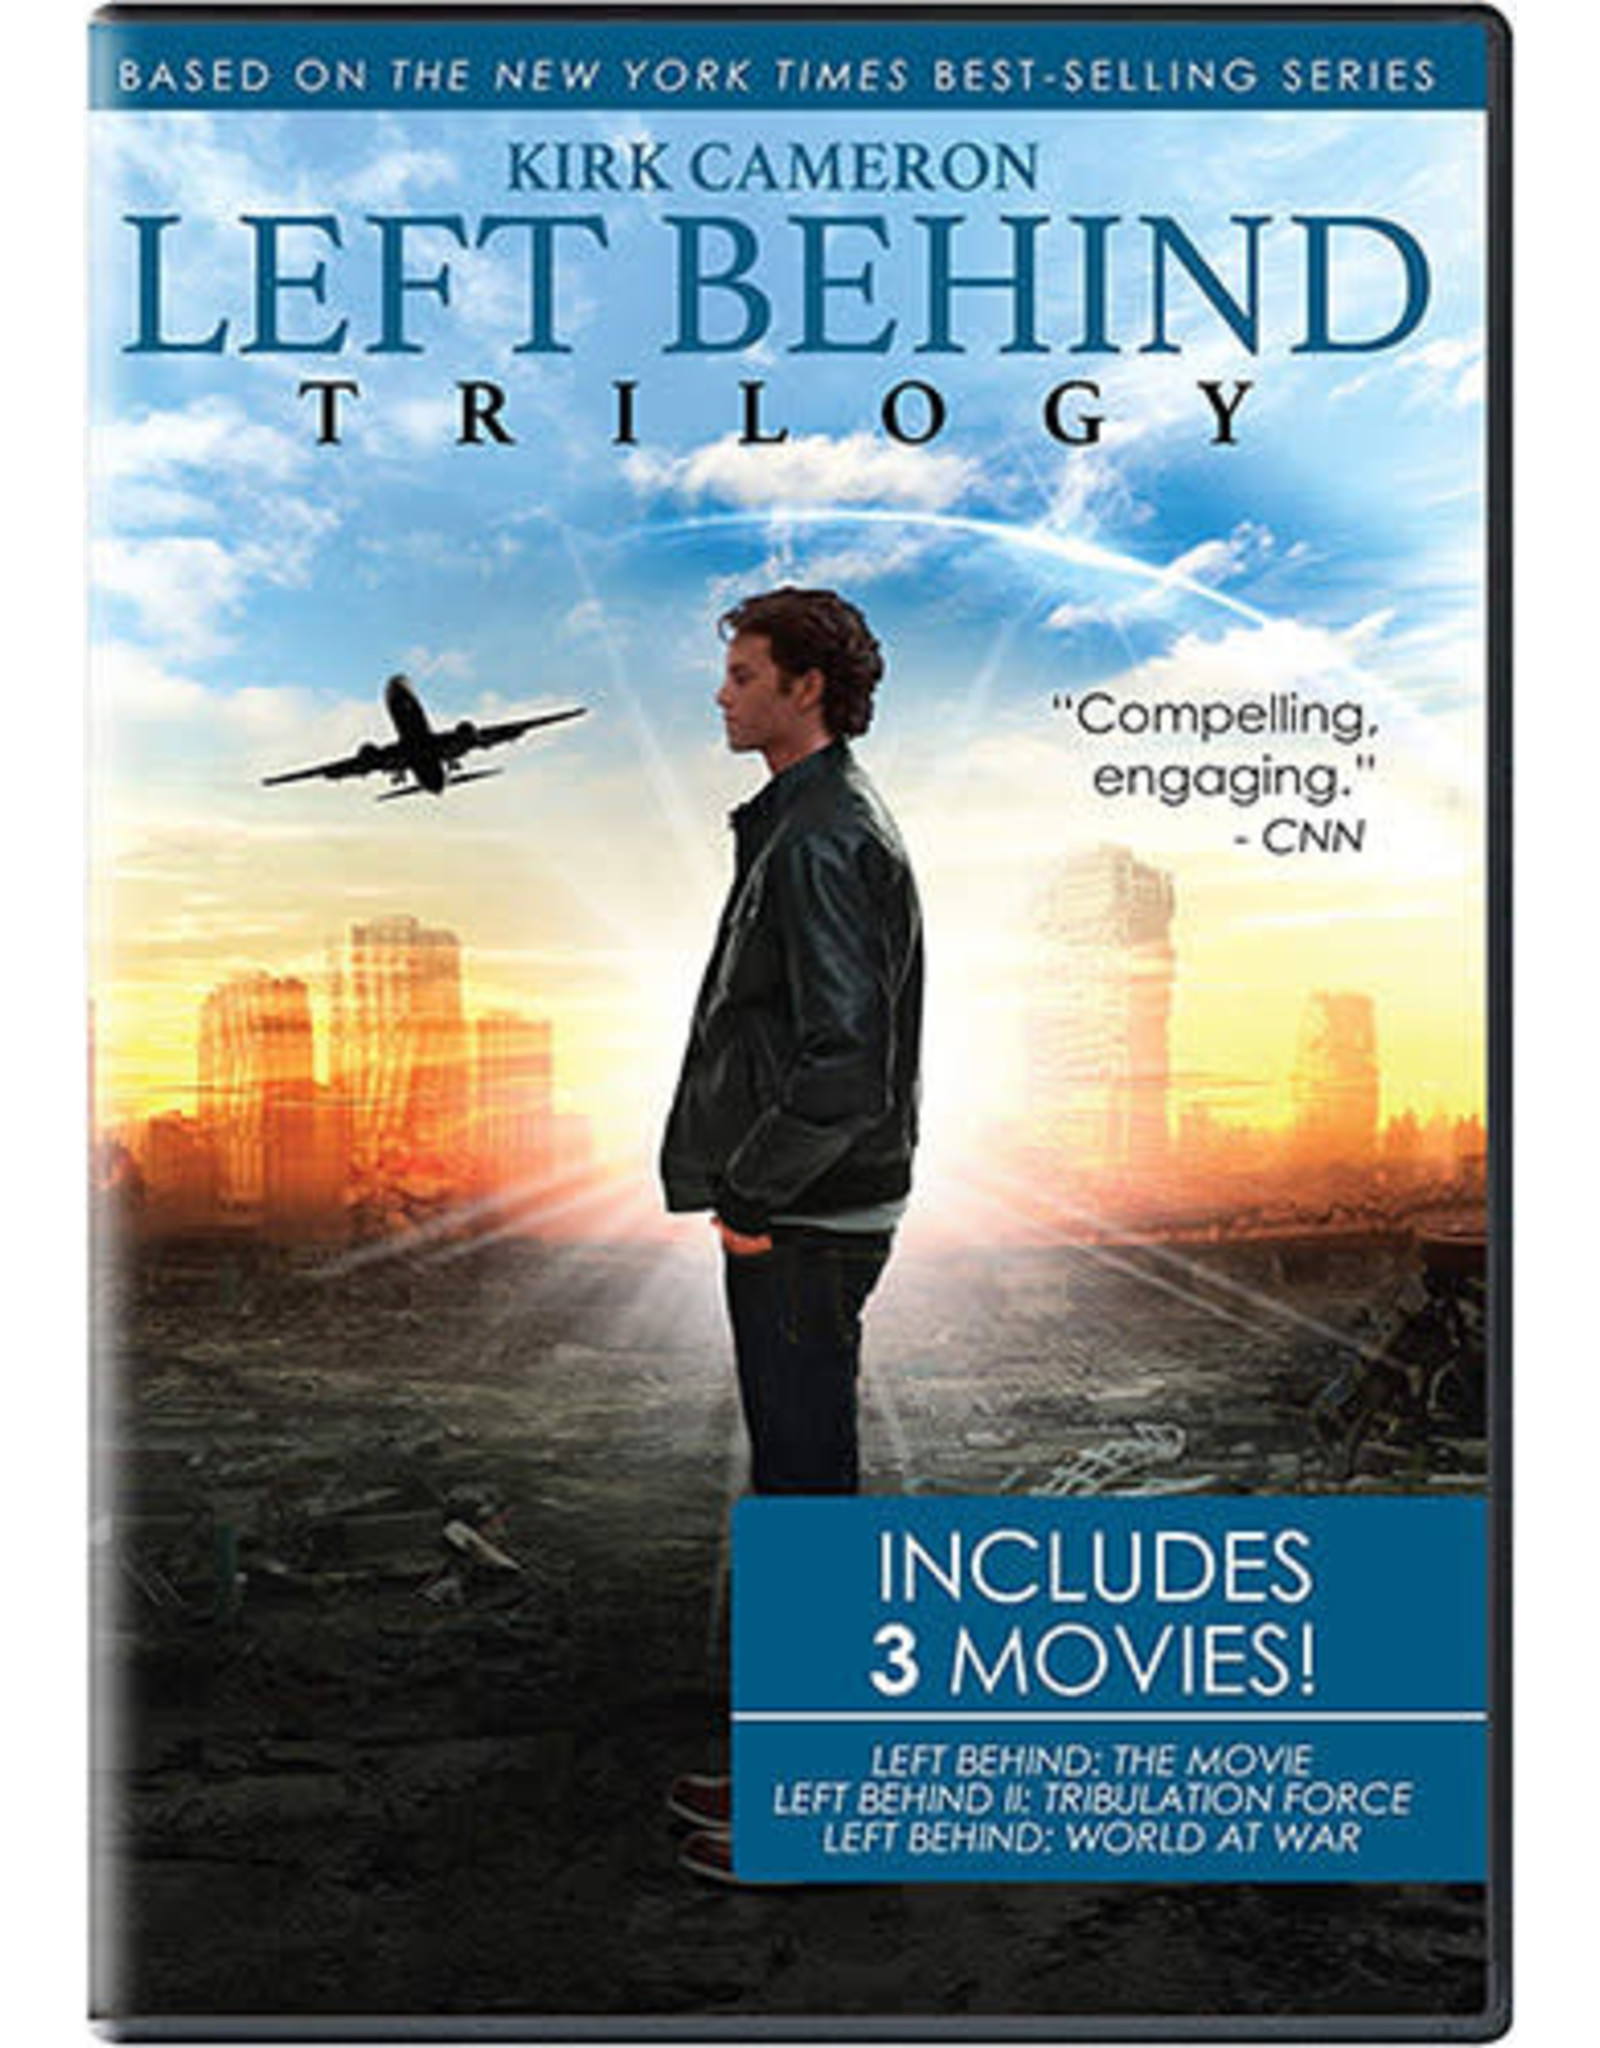 Left Behind Trilogy (3 DVD Collection)